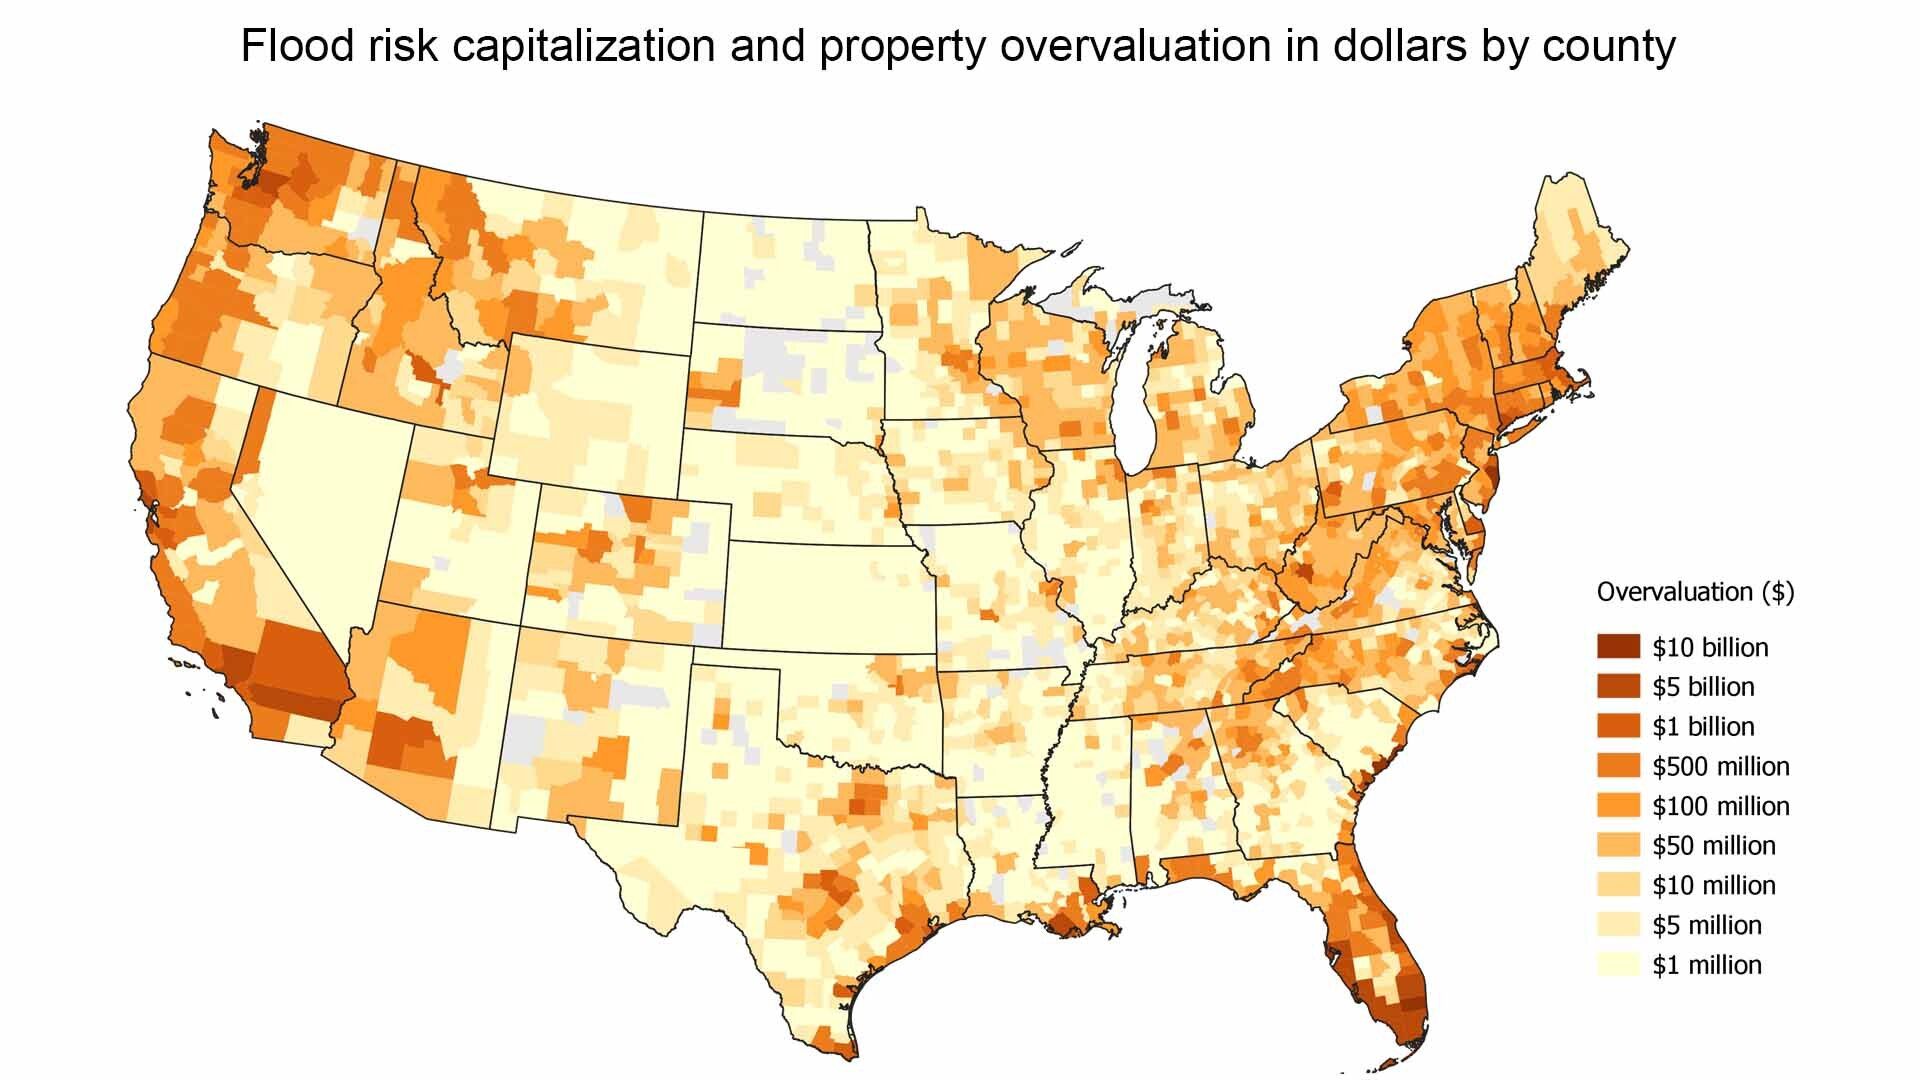 Flood risk capitalization and property overvaluation in dollars by county.